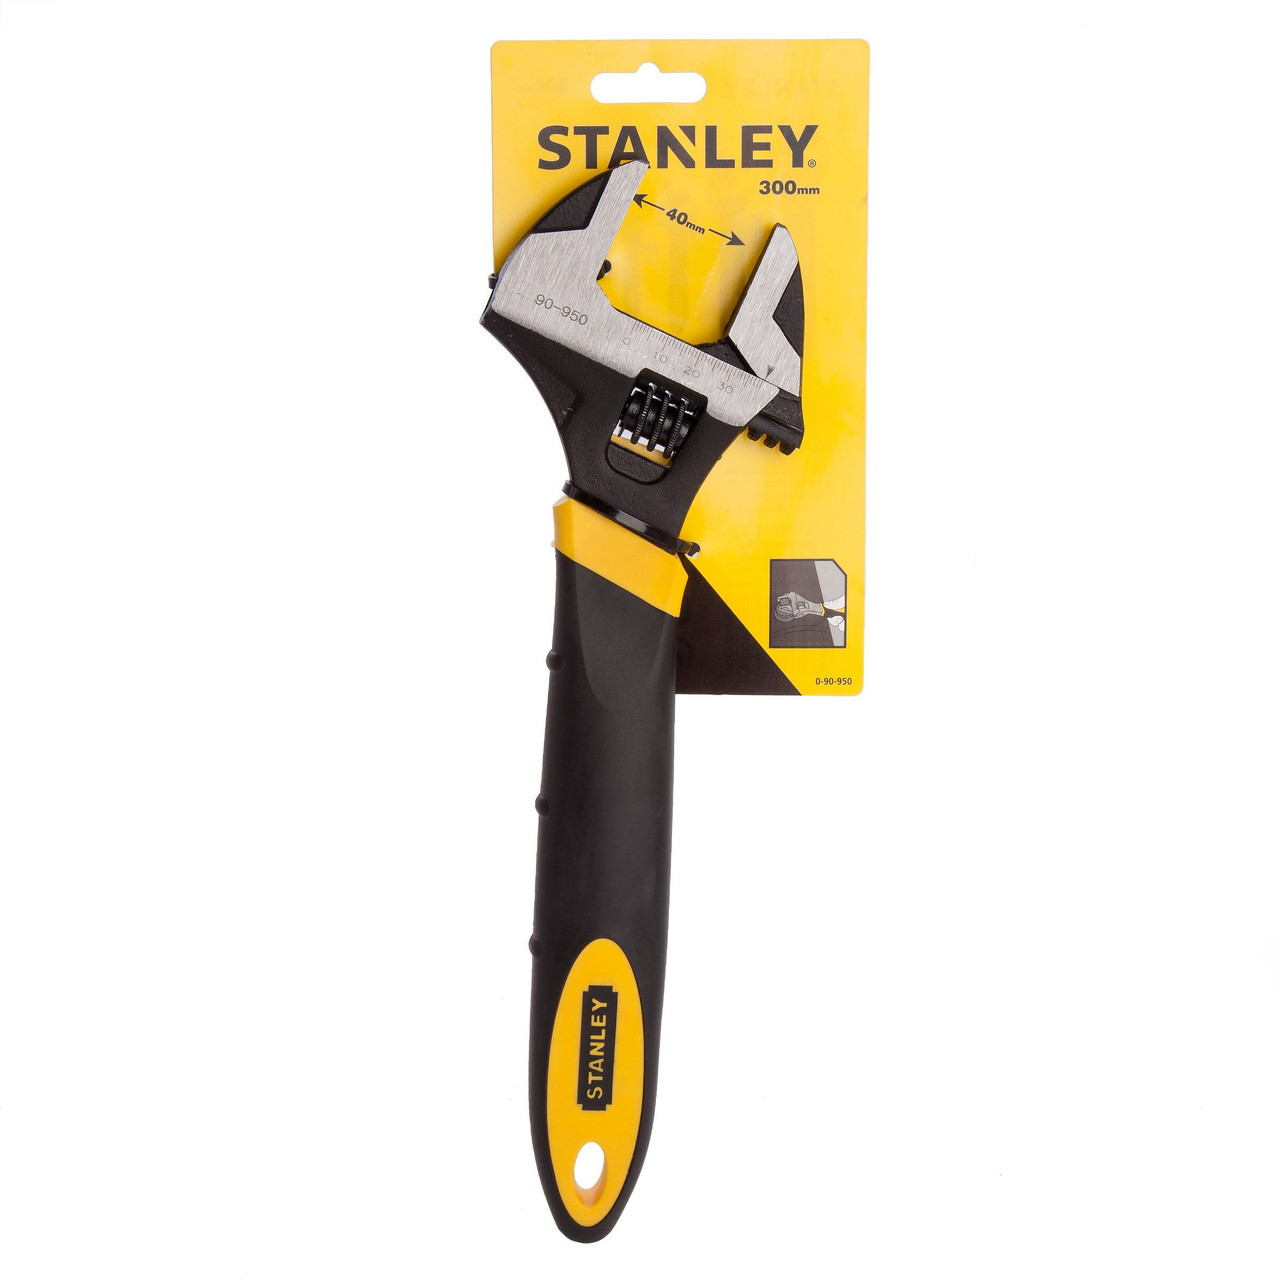 Adjustable Wrench 300mm MaxSteel 12in Stanley / 0-90-950